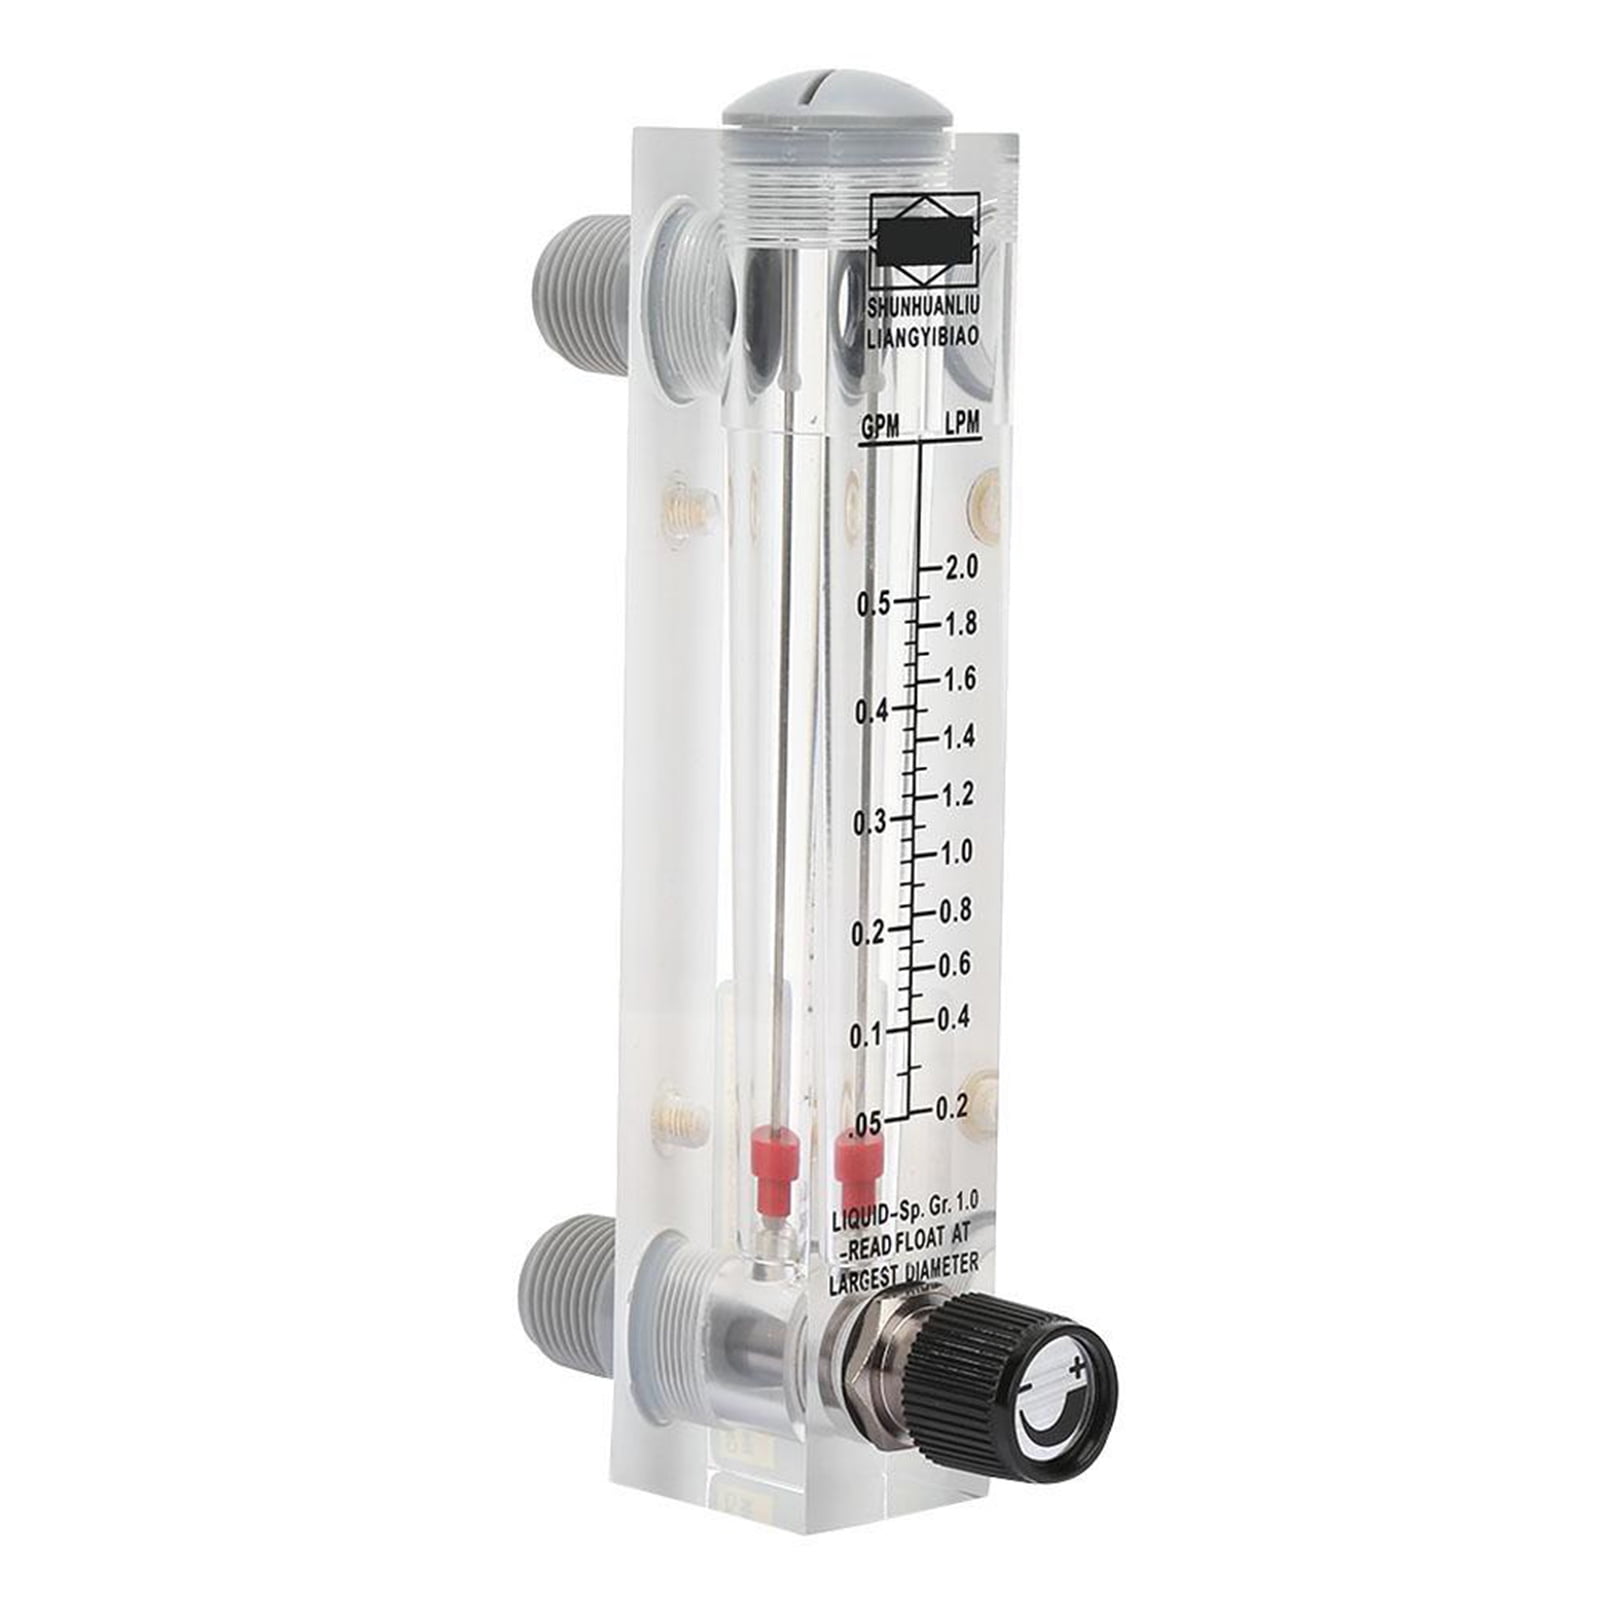 LZM-25/ acrylic panel type  flow meter for water/gas/air  PT or NPT 1" thread 